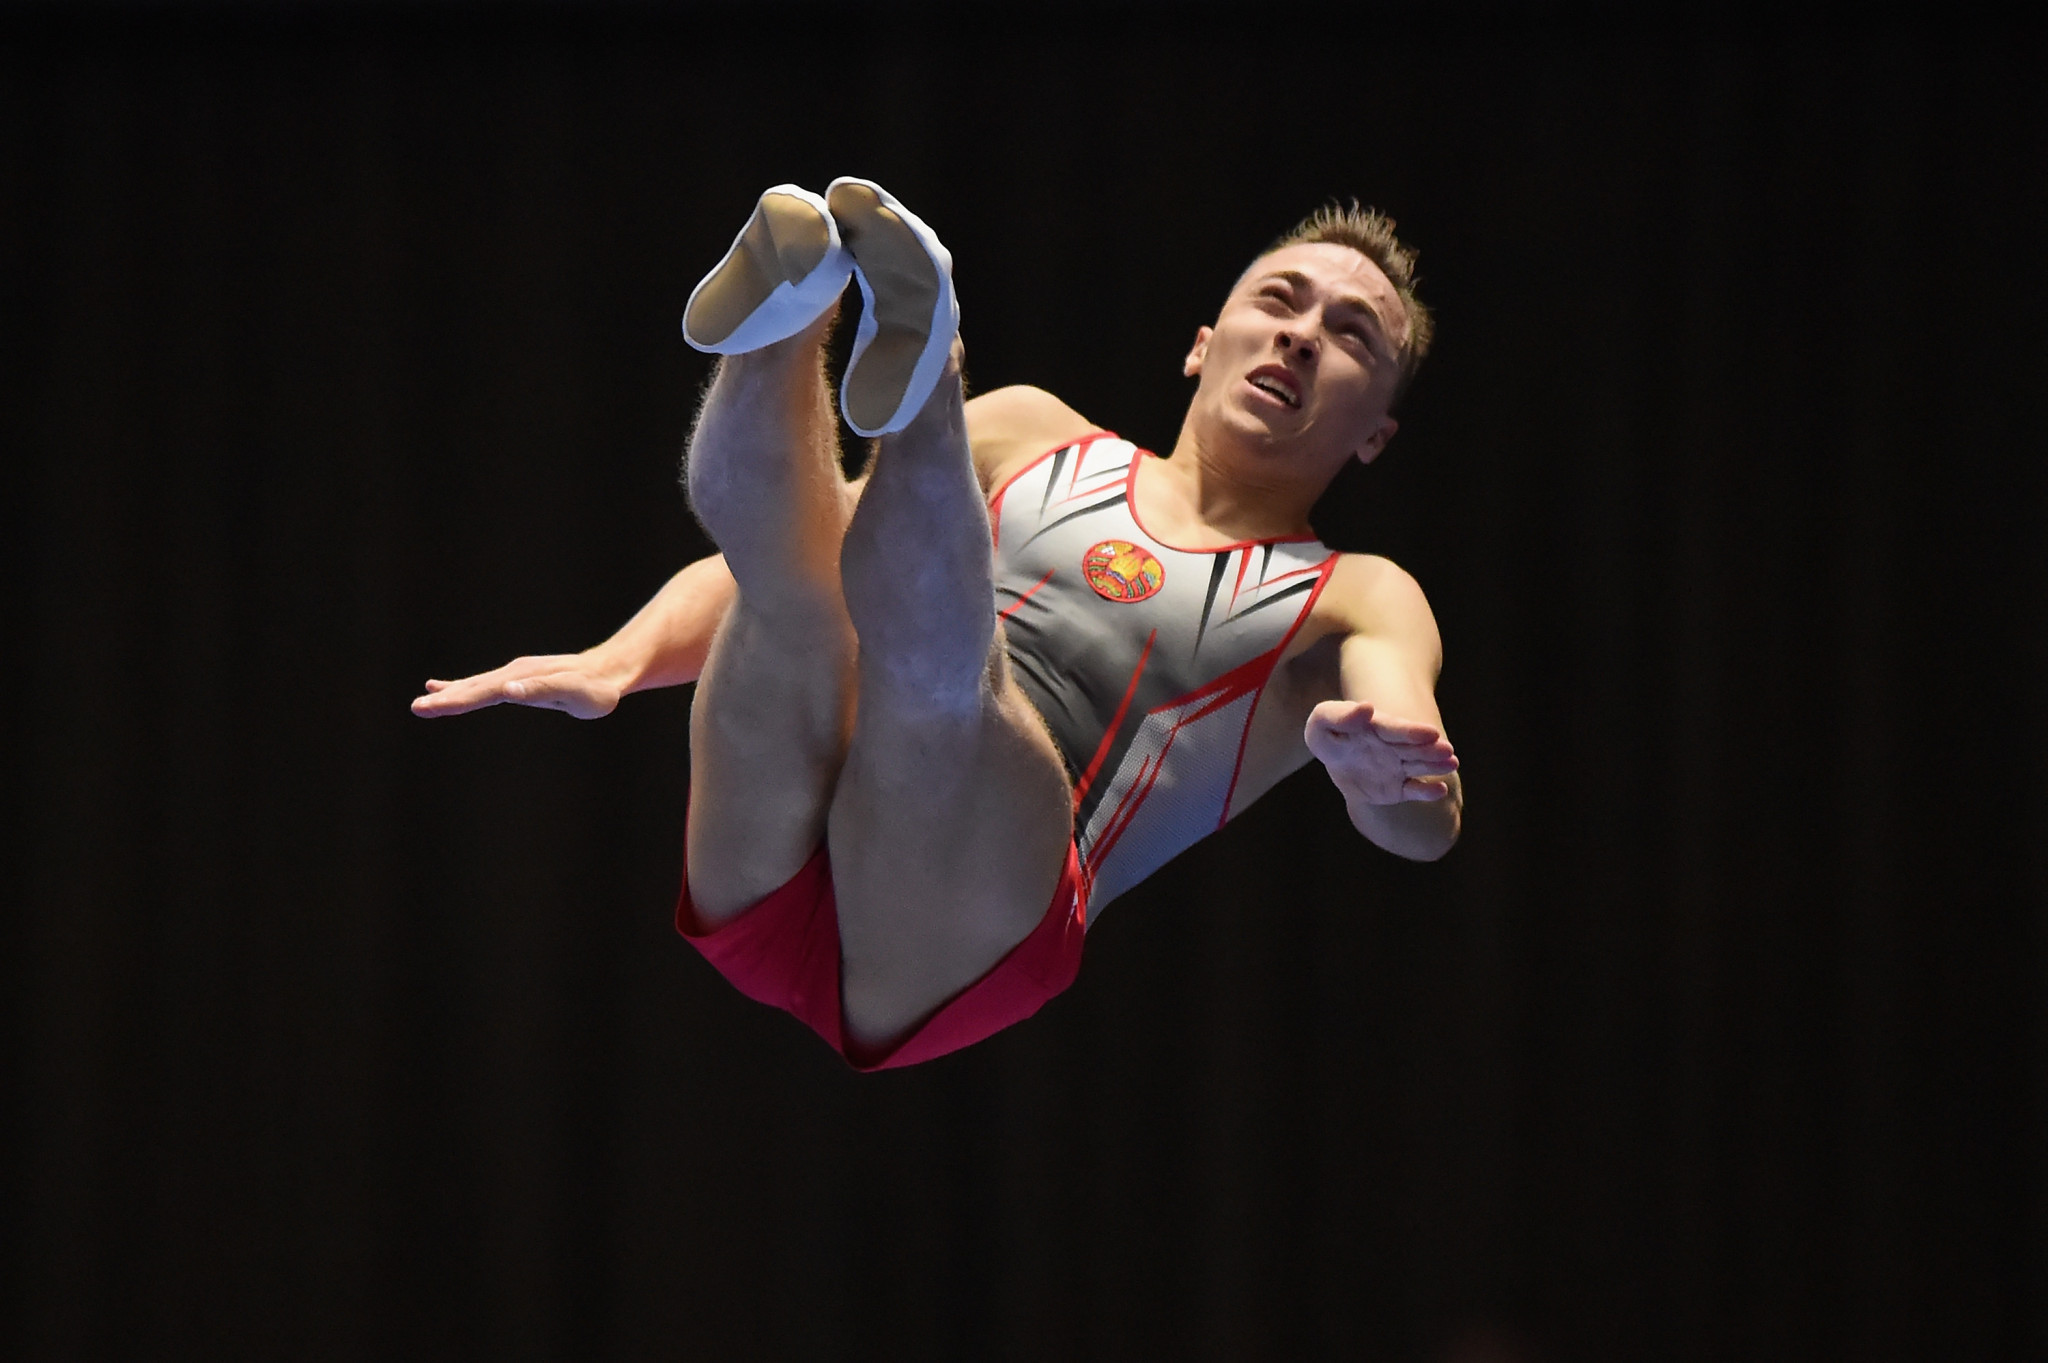 Belarusian Olympic champion Uladzislau Hancharou will compete at the men's individual trampoline event at the FIG Trampoline World Cup in Minsk ©Getty Images